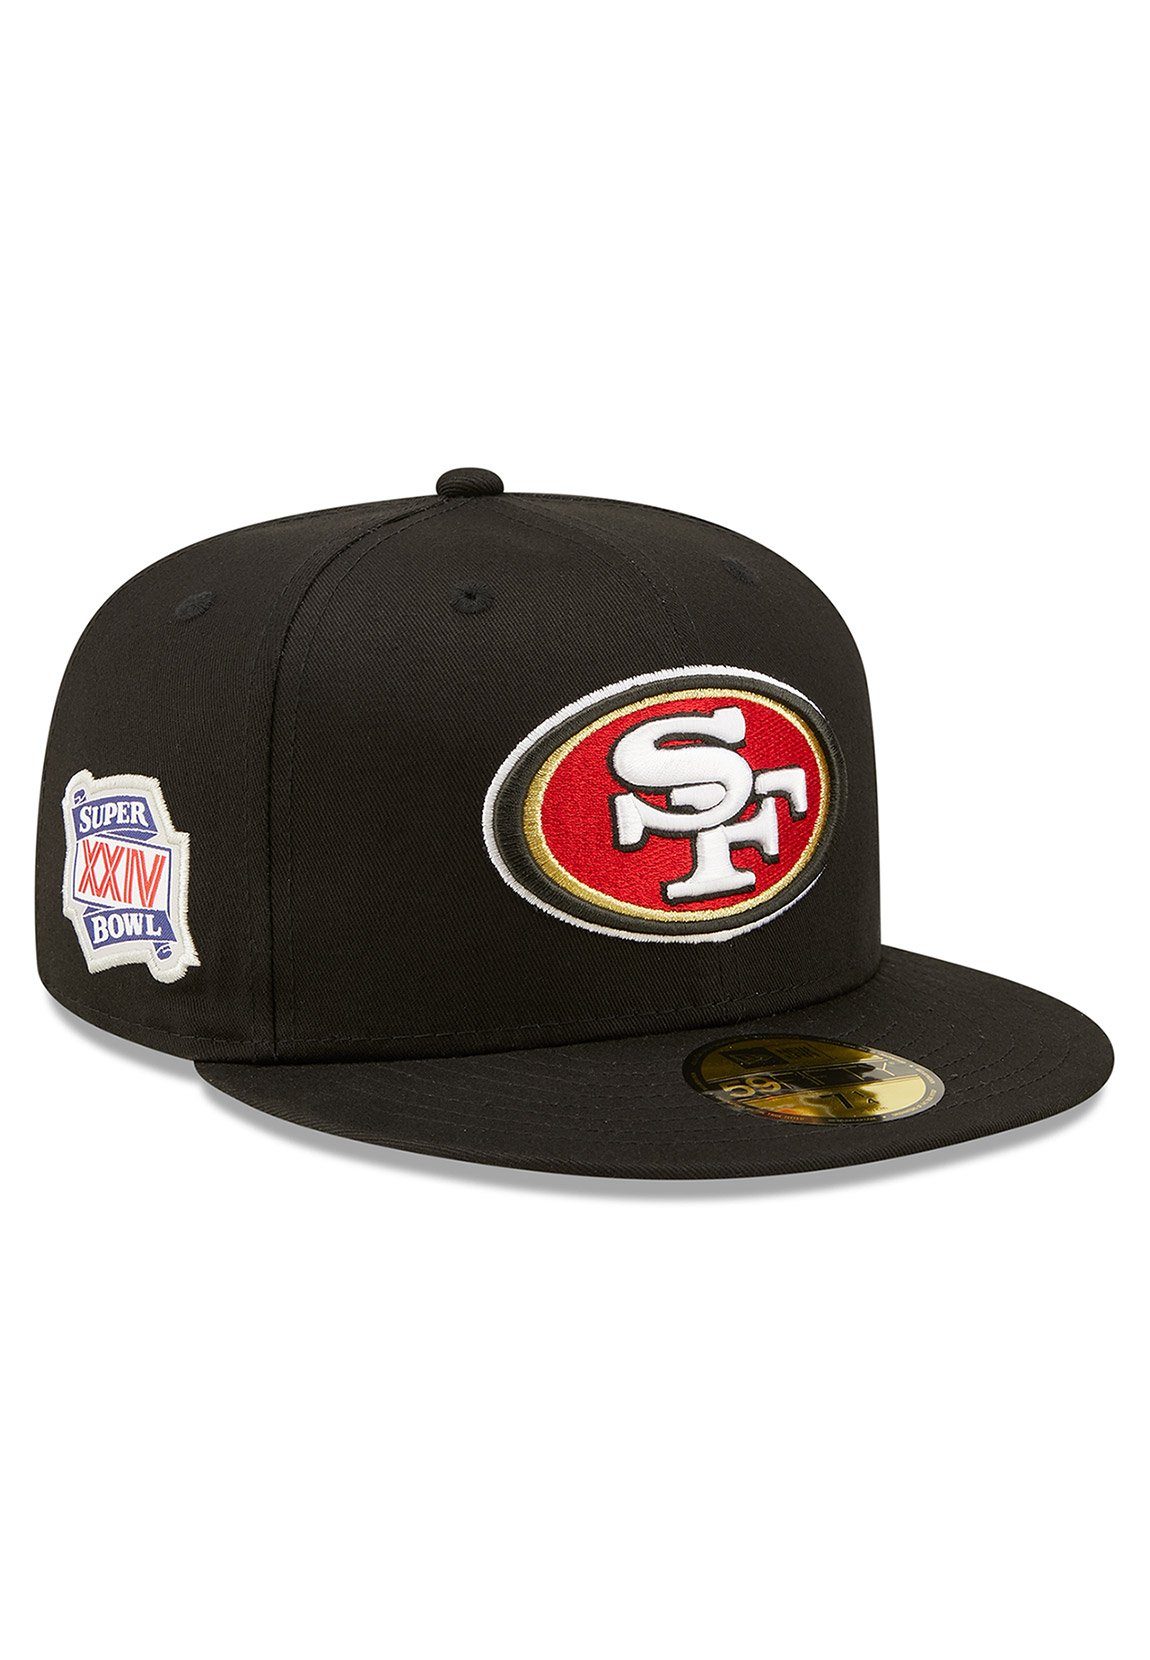 Era Cap New Patch FRANCISCO New SAN Fitted Schwarz 49ers 59Fifty Side